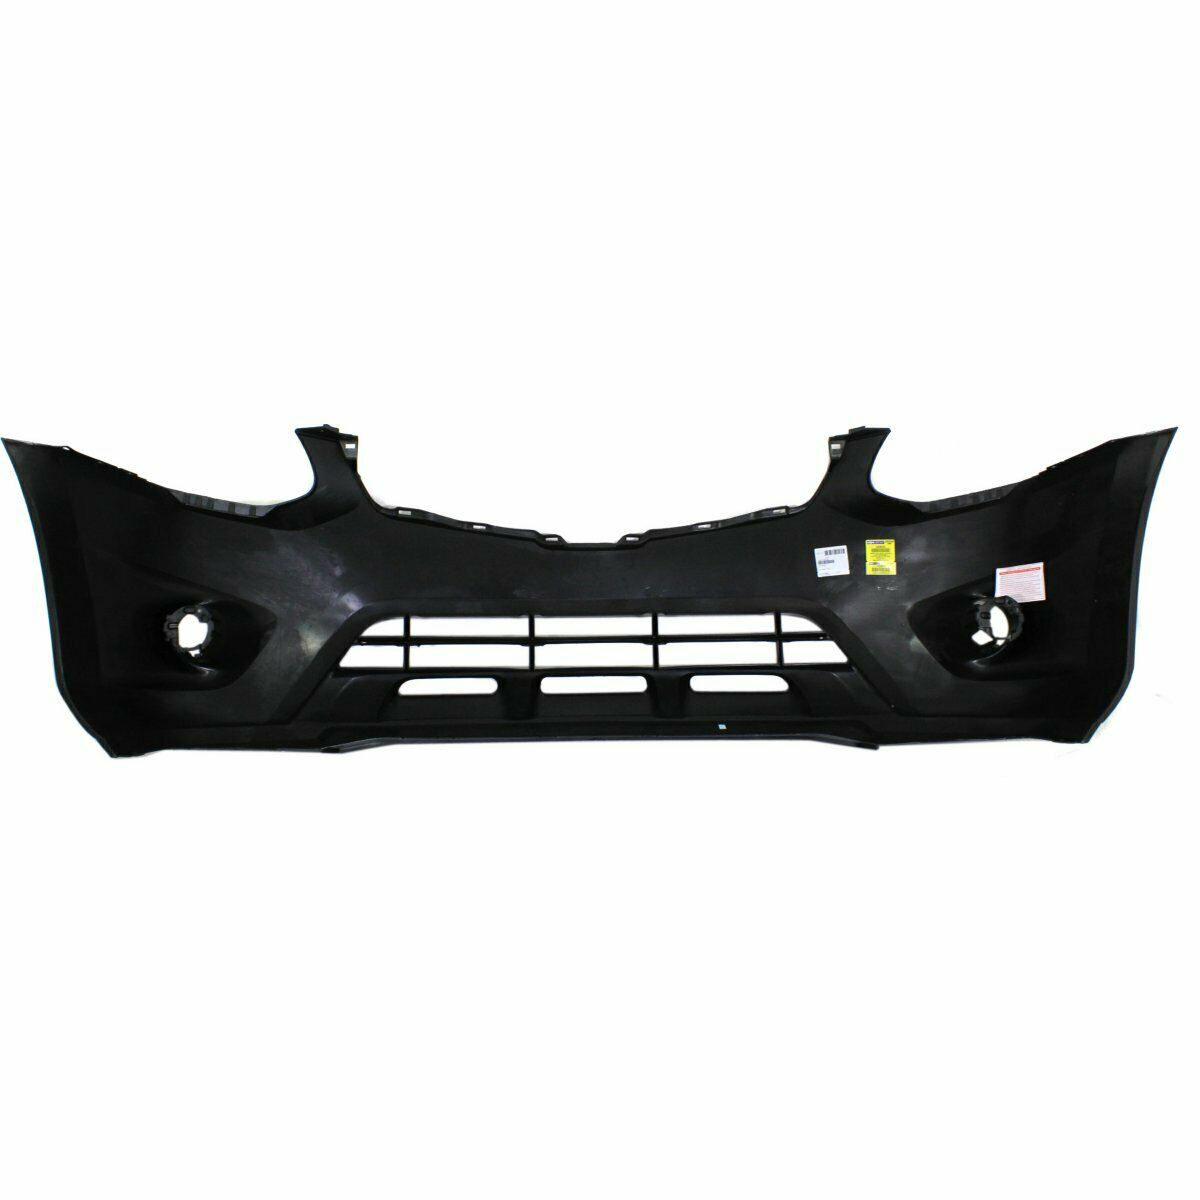 2011-2013 Nissan Rogue S/SL/SV Front Bumper Painted to Match